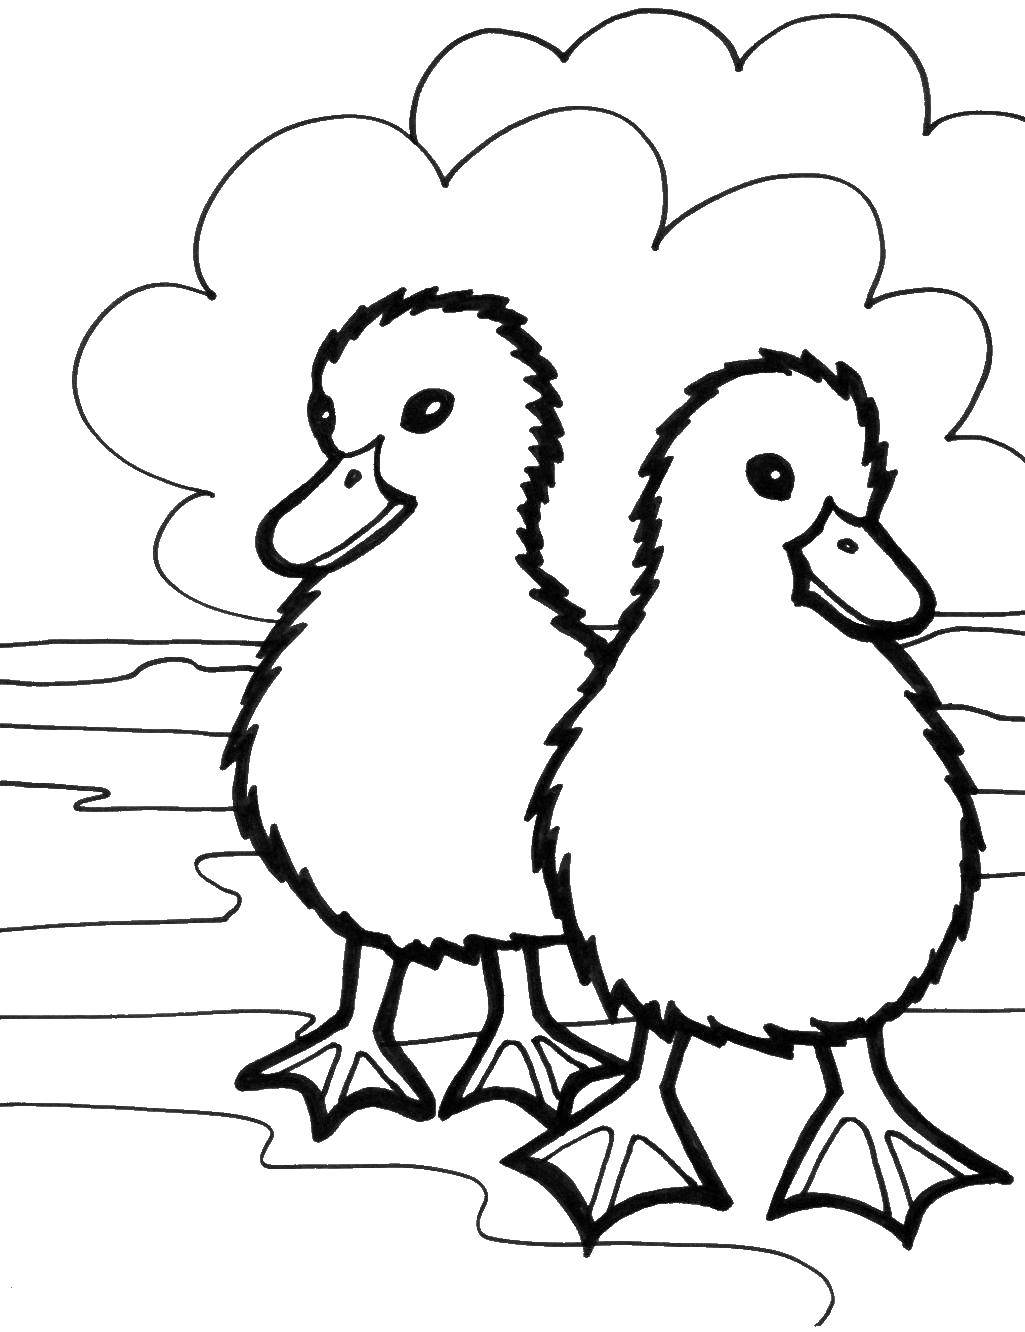 Coloring Ducklings. Category birds. Tags:  Poultry, duck.